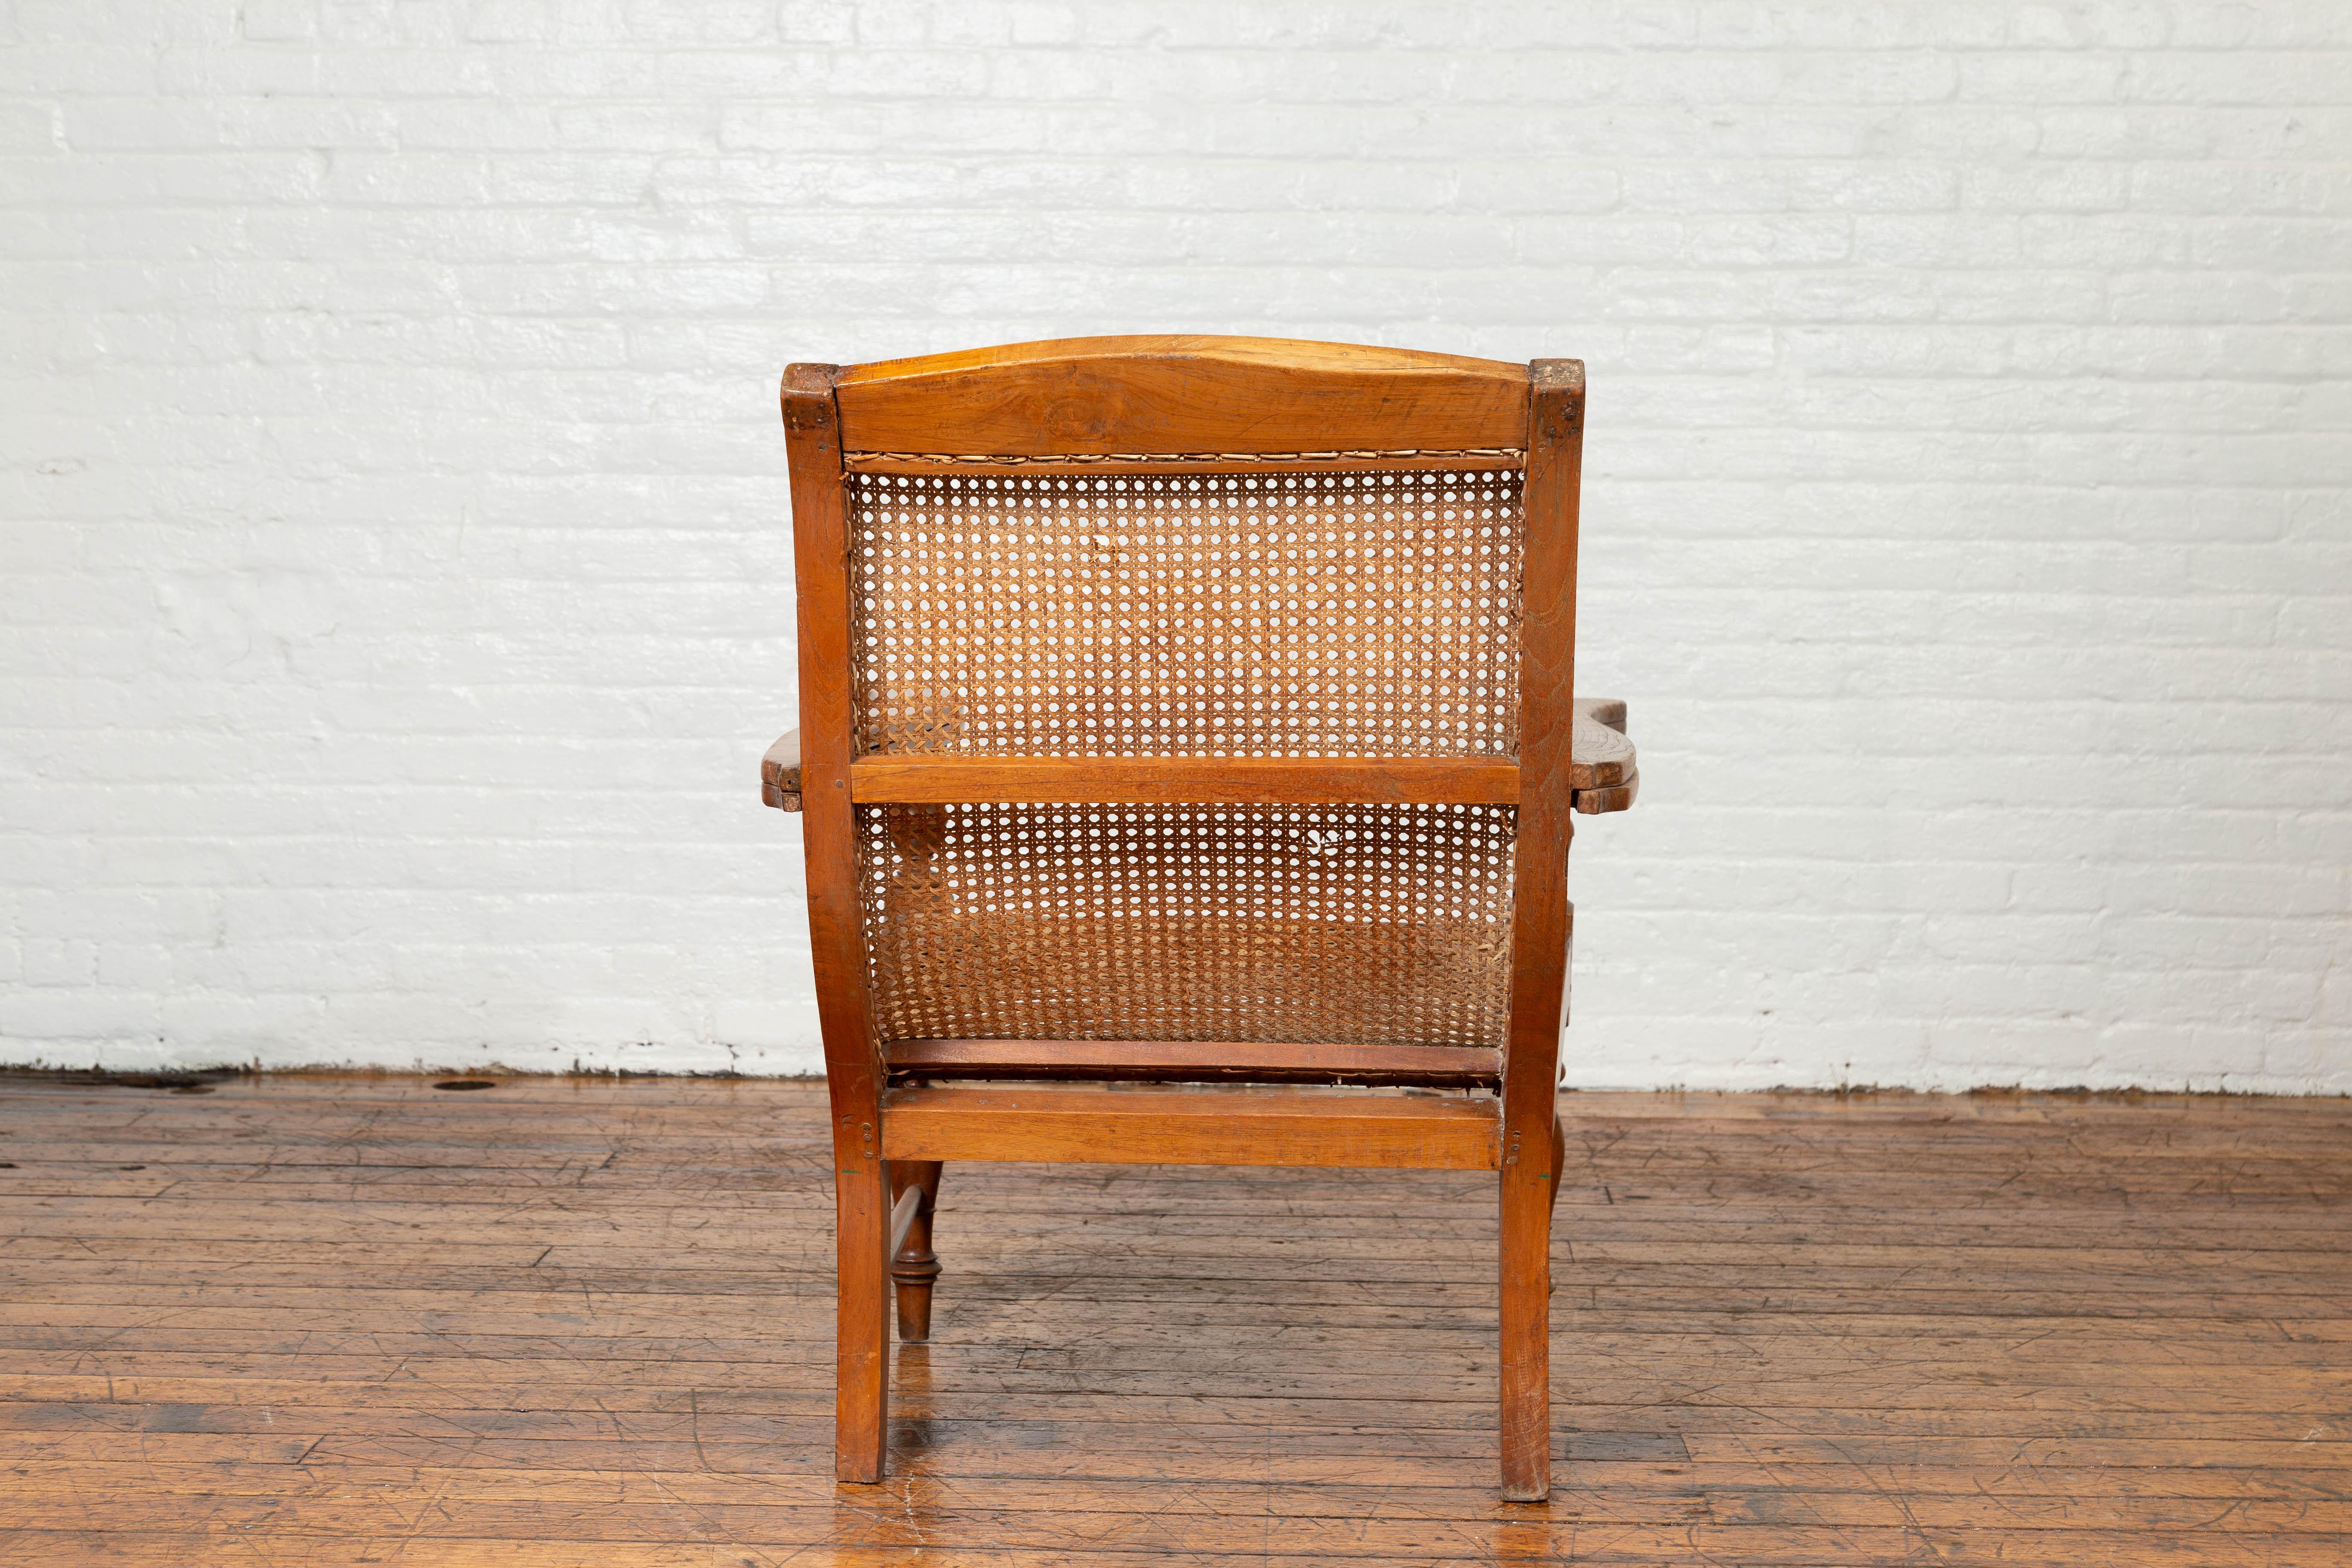 Indonesian Dutch Colonial Vintage Teak Plantation Lounge Chair with Curving Seat and Rattan